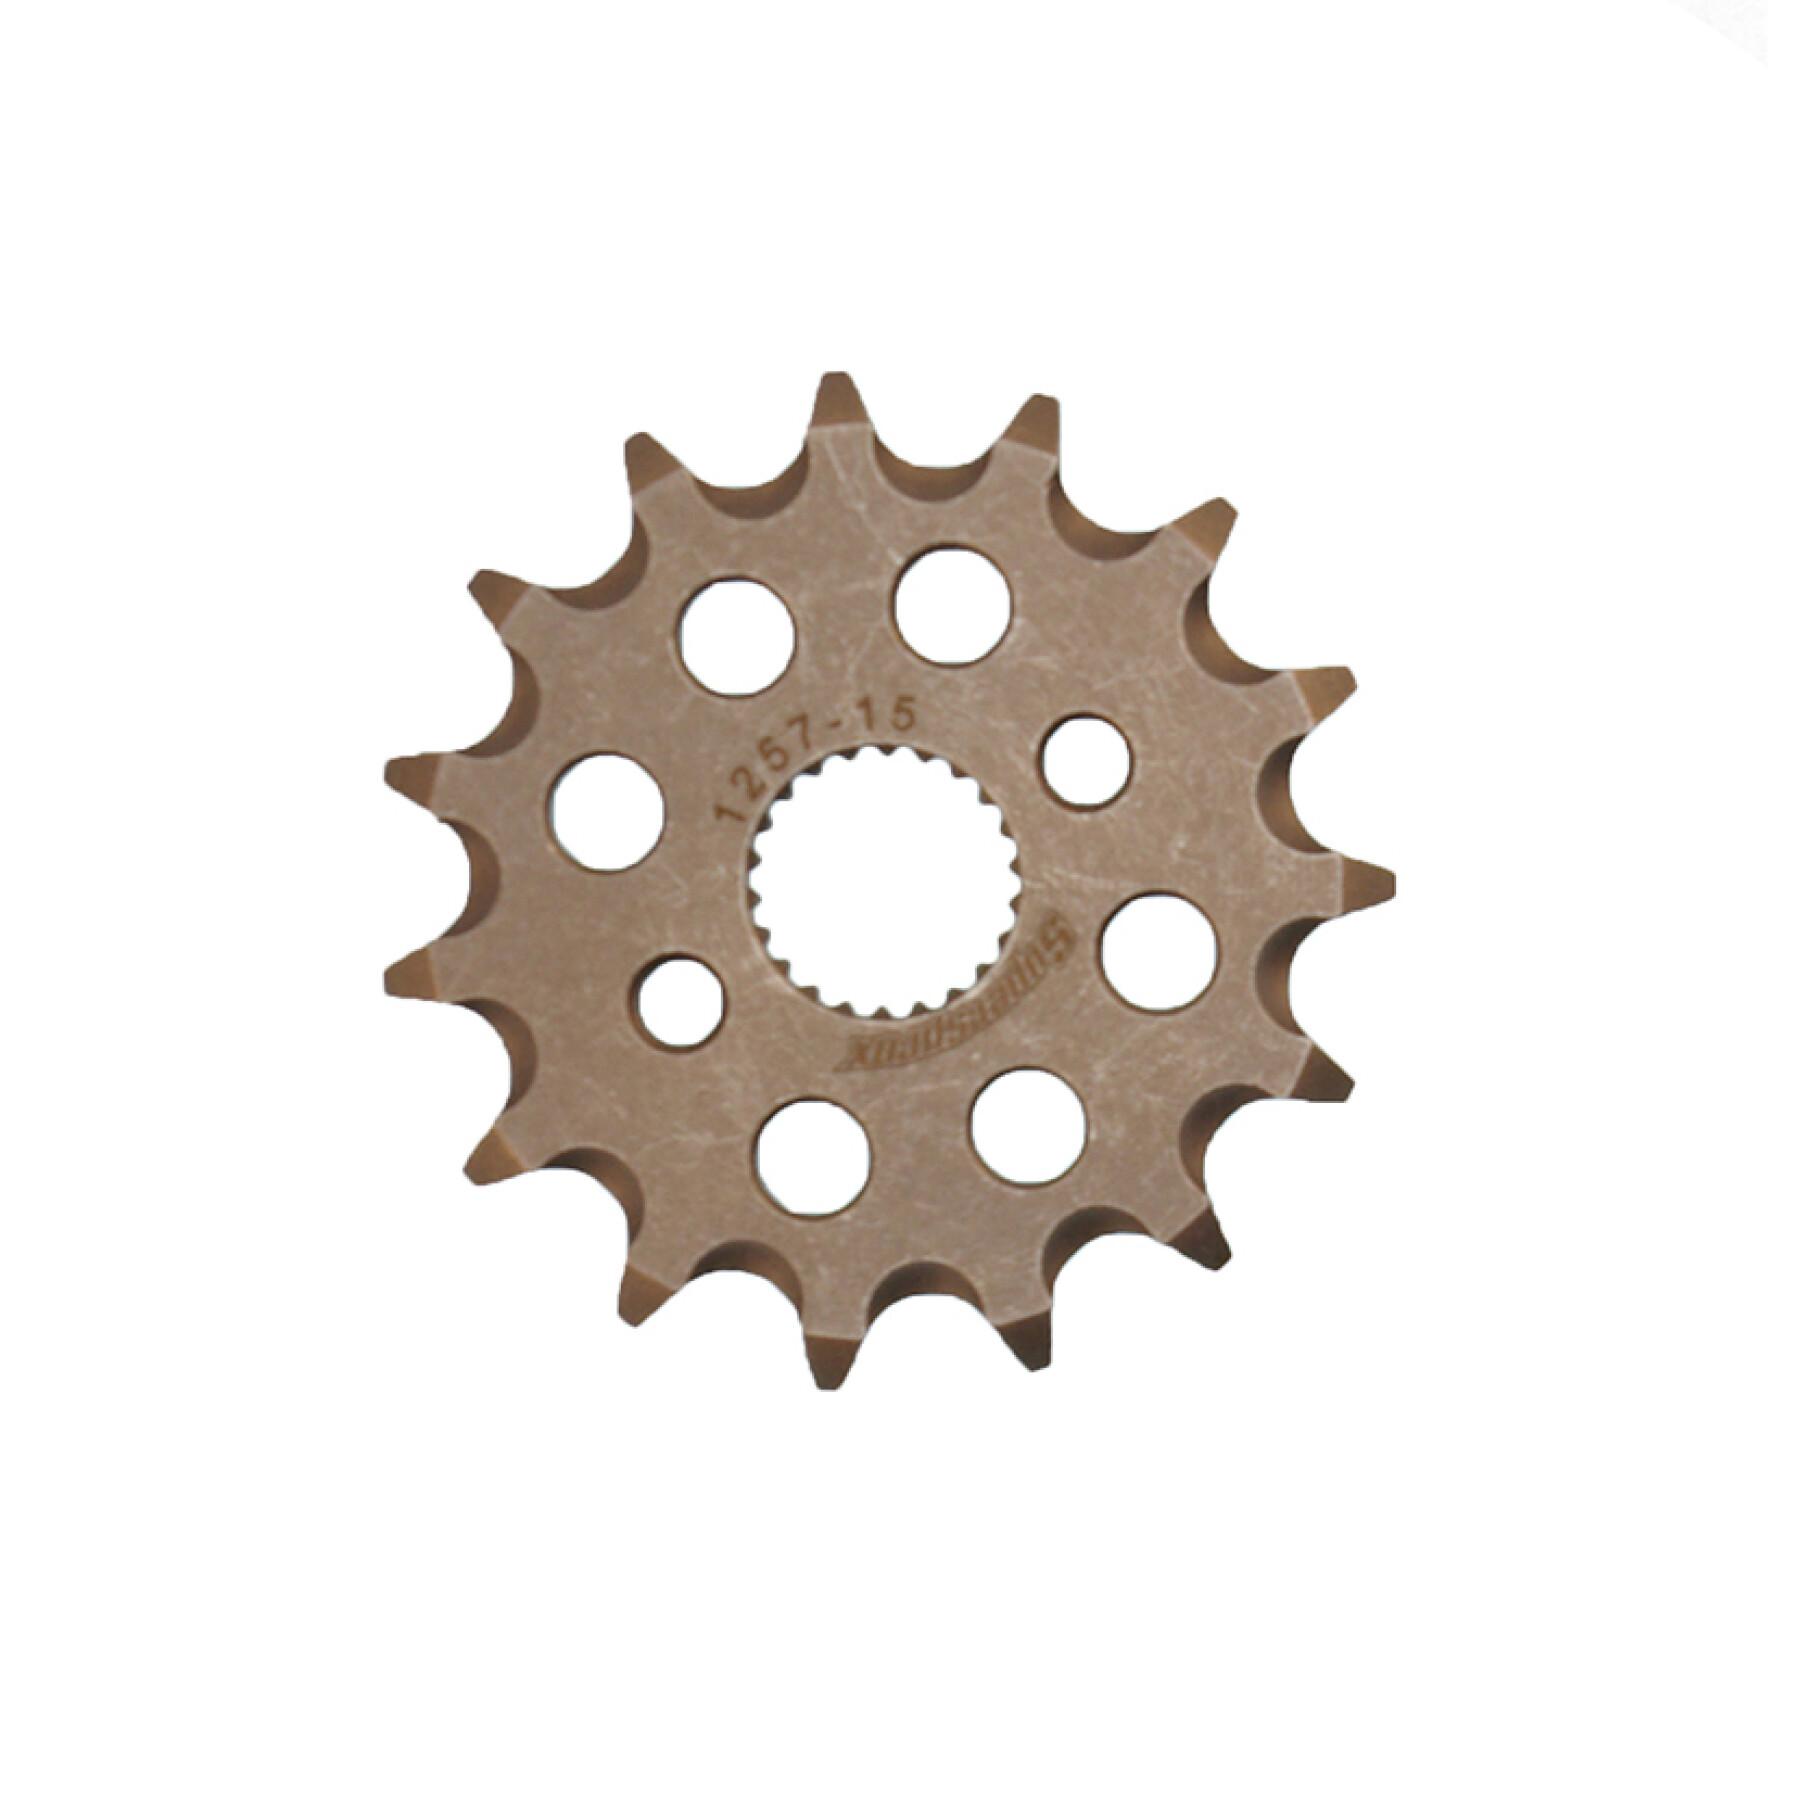 Motorcycle chain sprocket Supersprox PSB CST-1257:15 # JTF1257.15